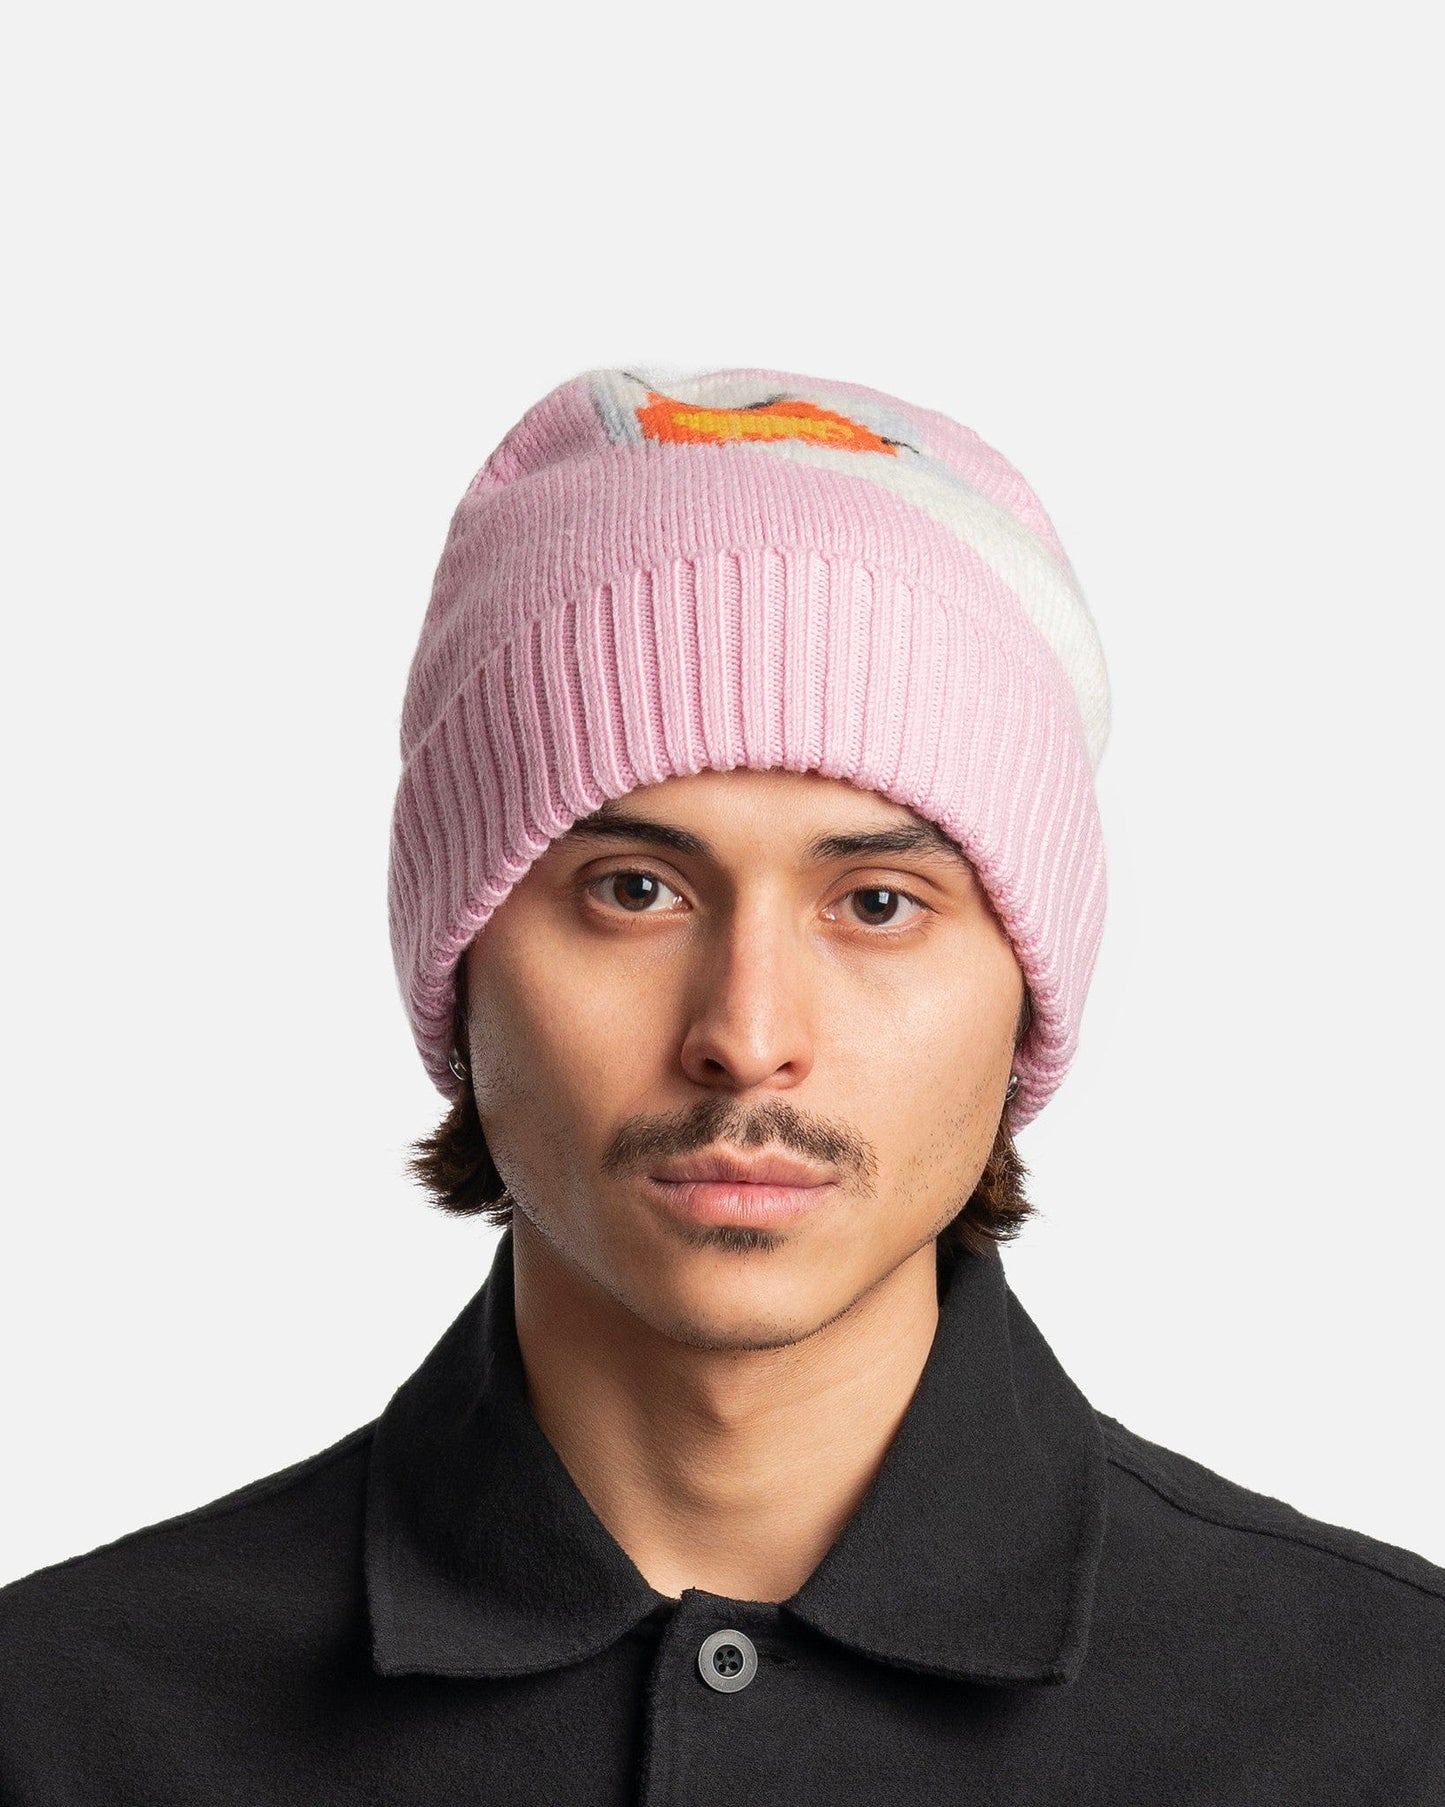 JW Anderson Men's Hats O/S Intarsia Knit Swan Beanie in Light Pink